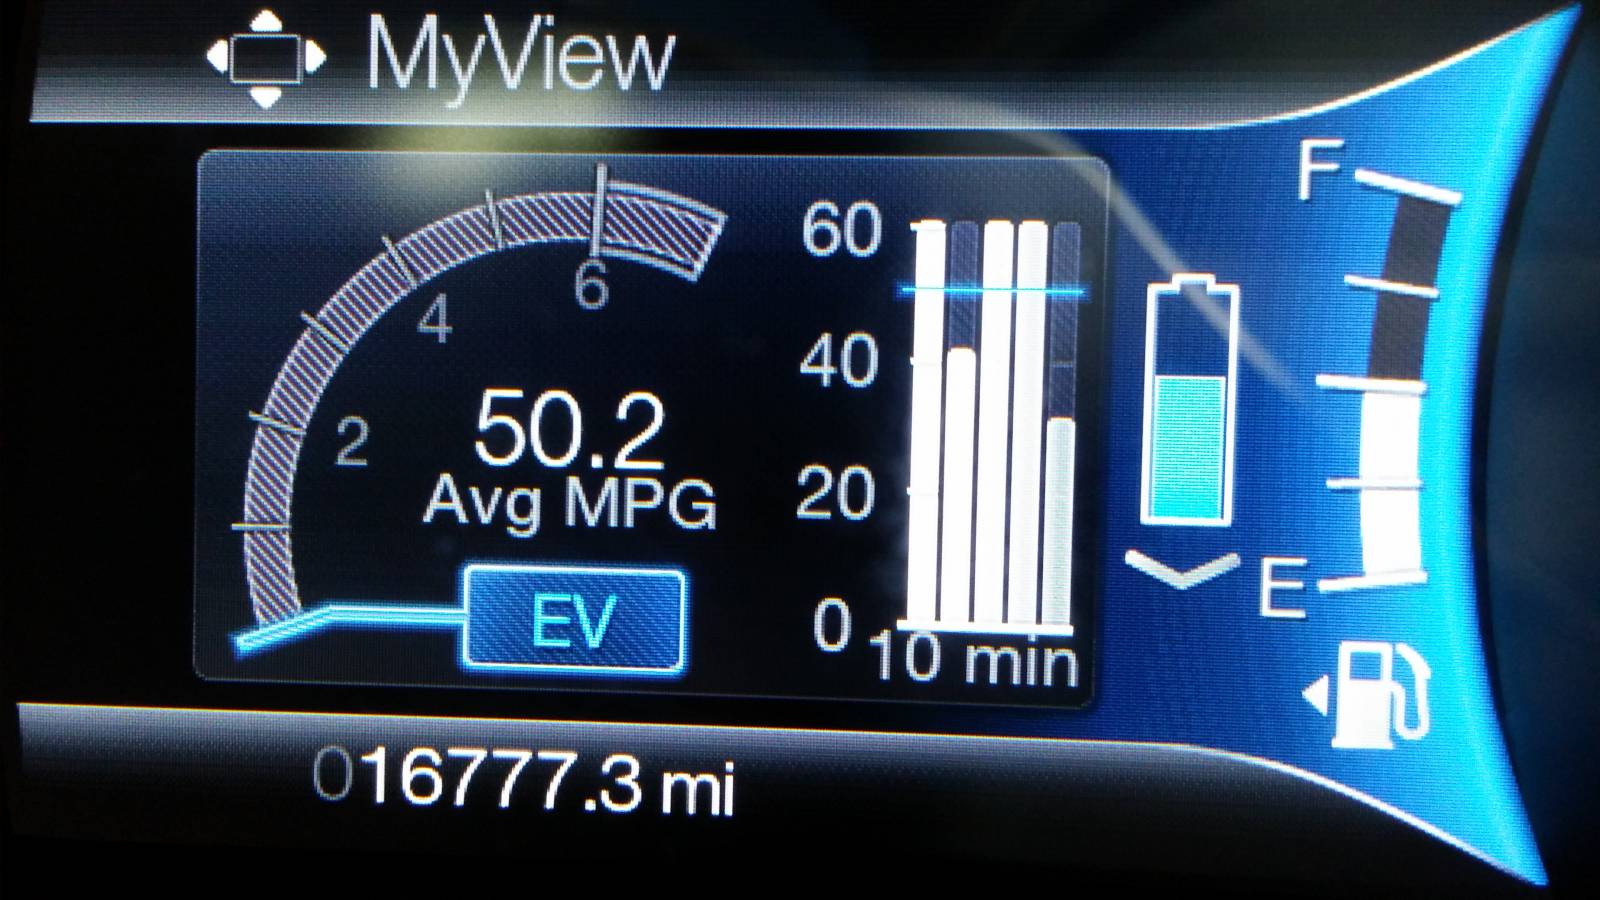 "Avg Fuel Economy" being used as Lifetime MPG Average